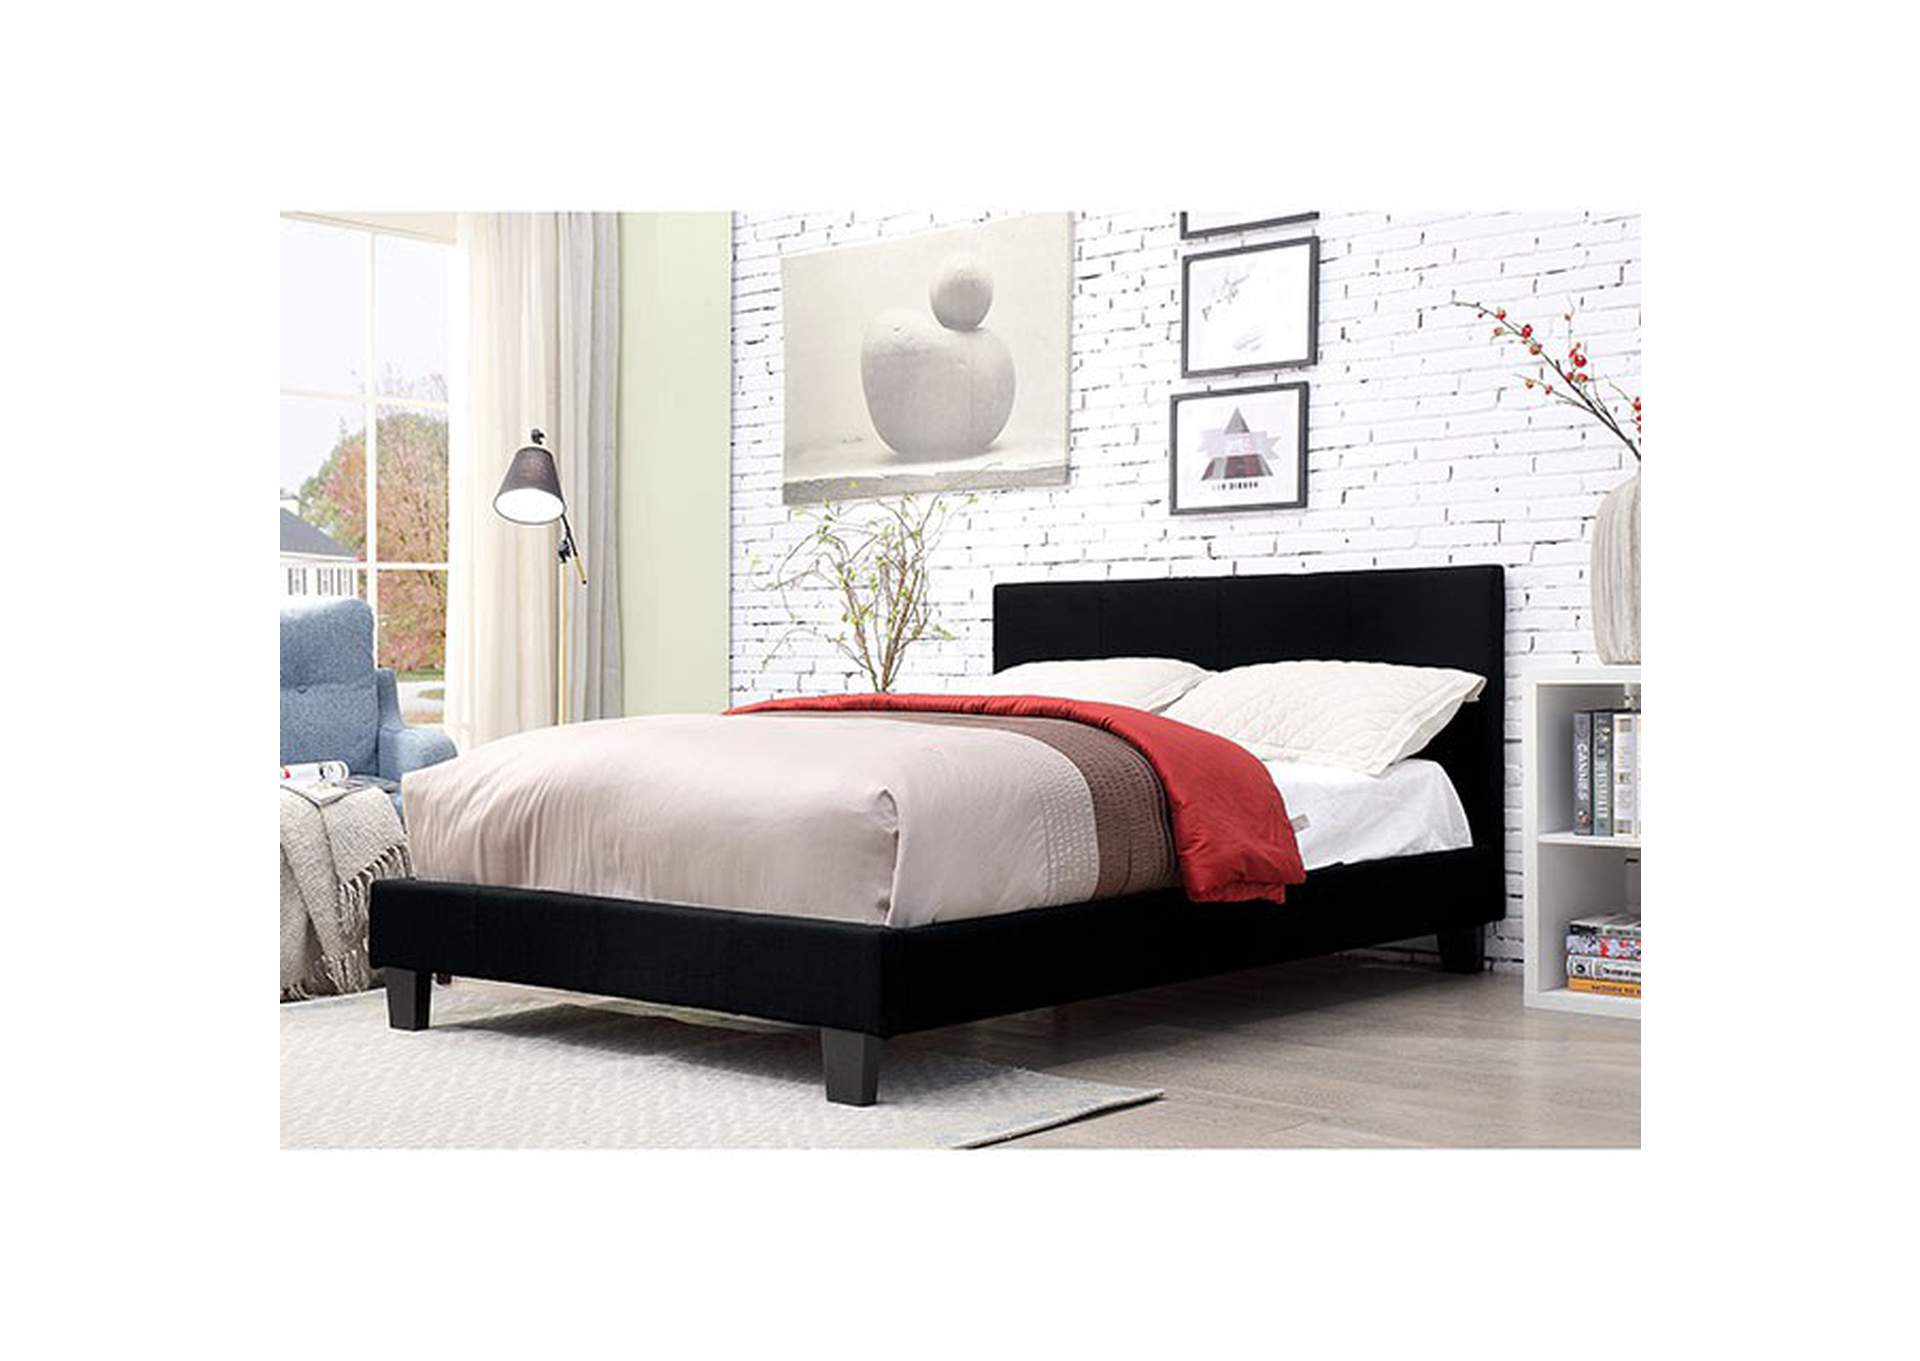 Sims Full Bed,Furniture of America